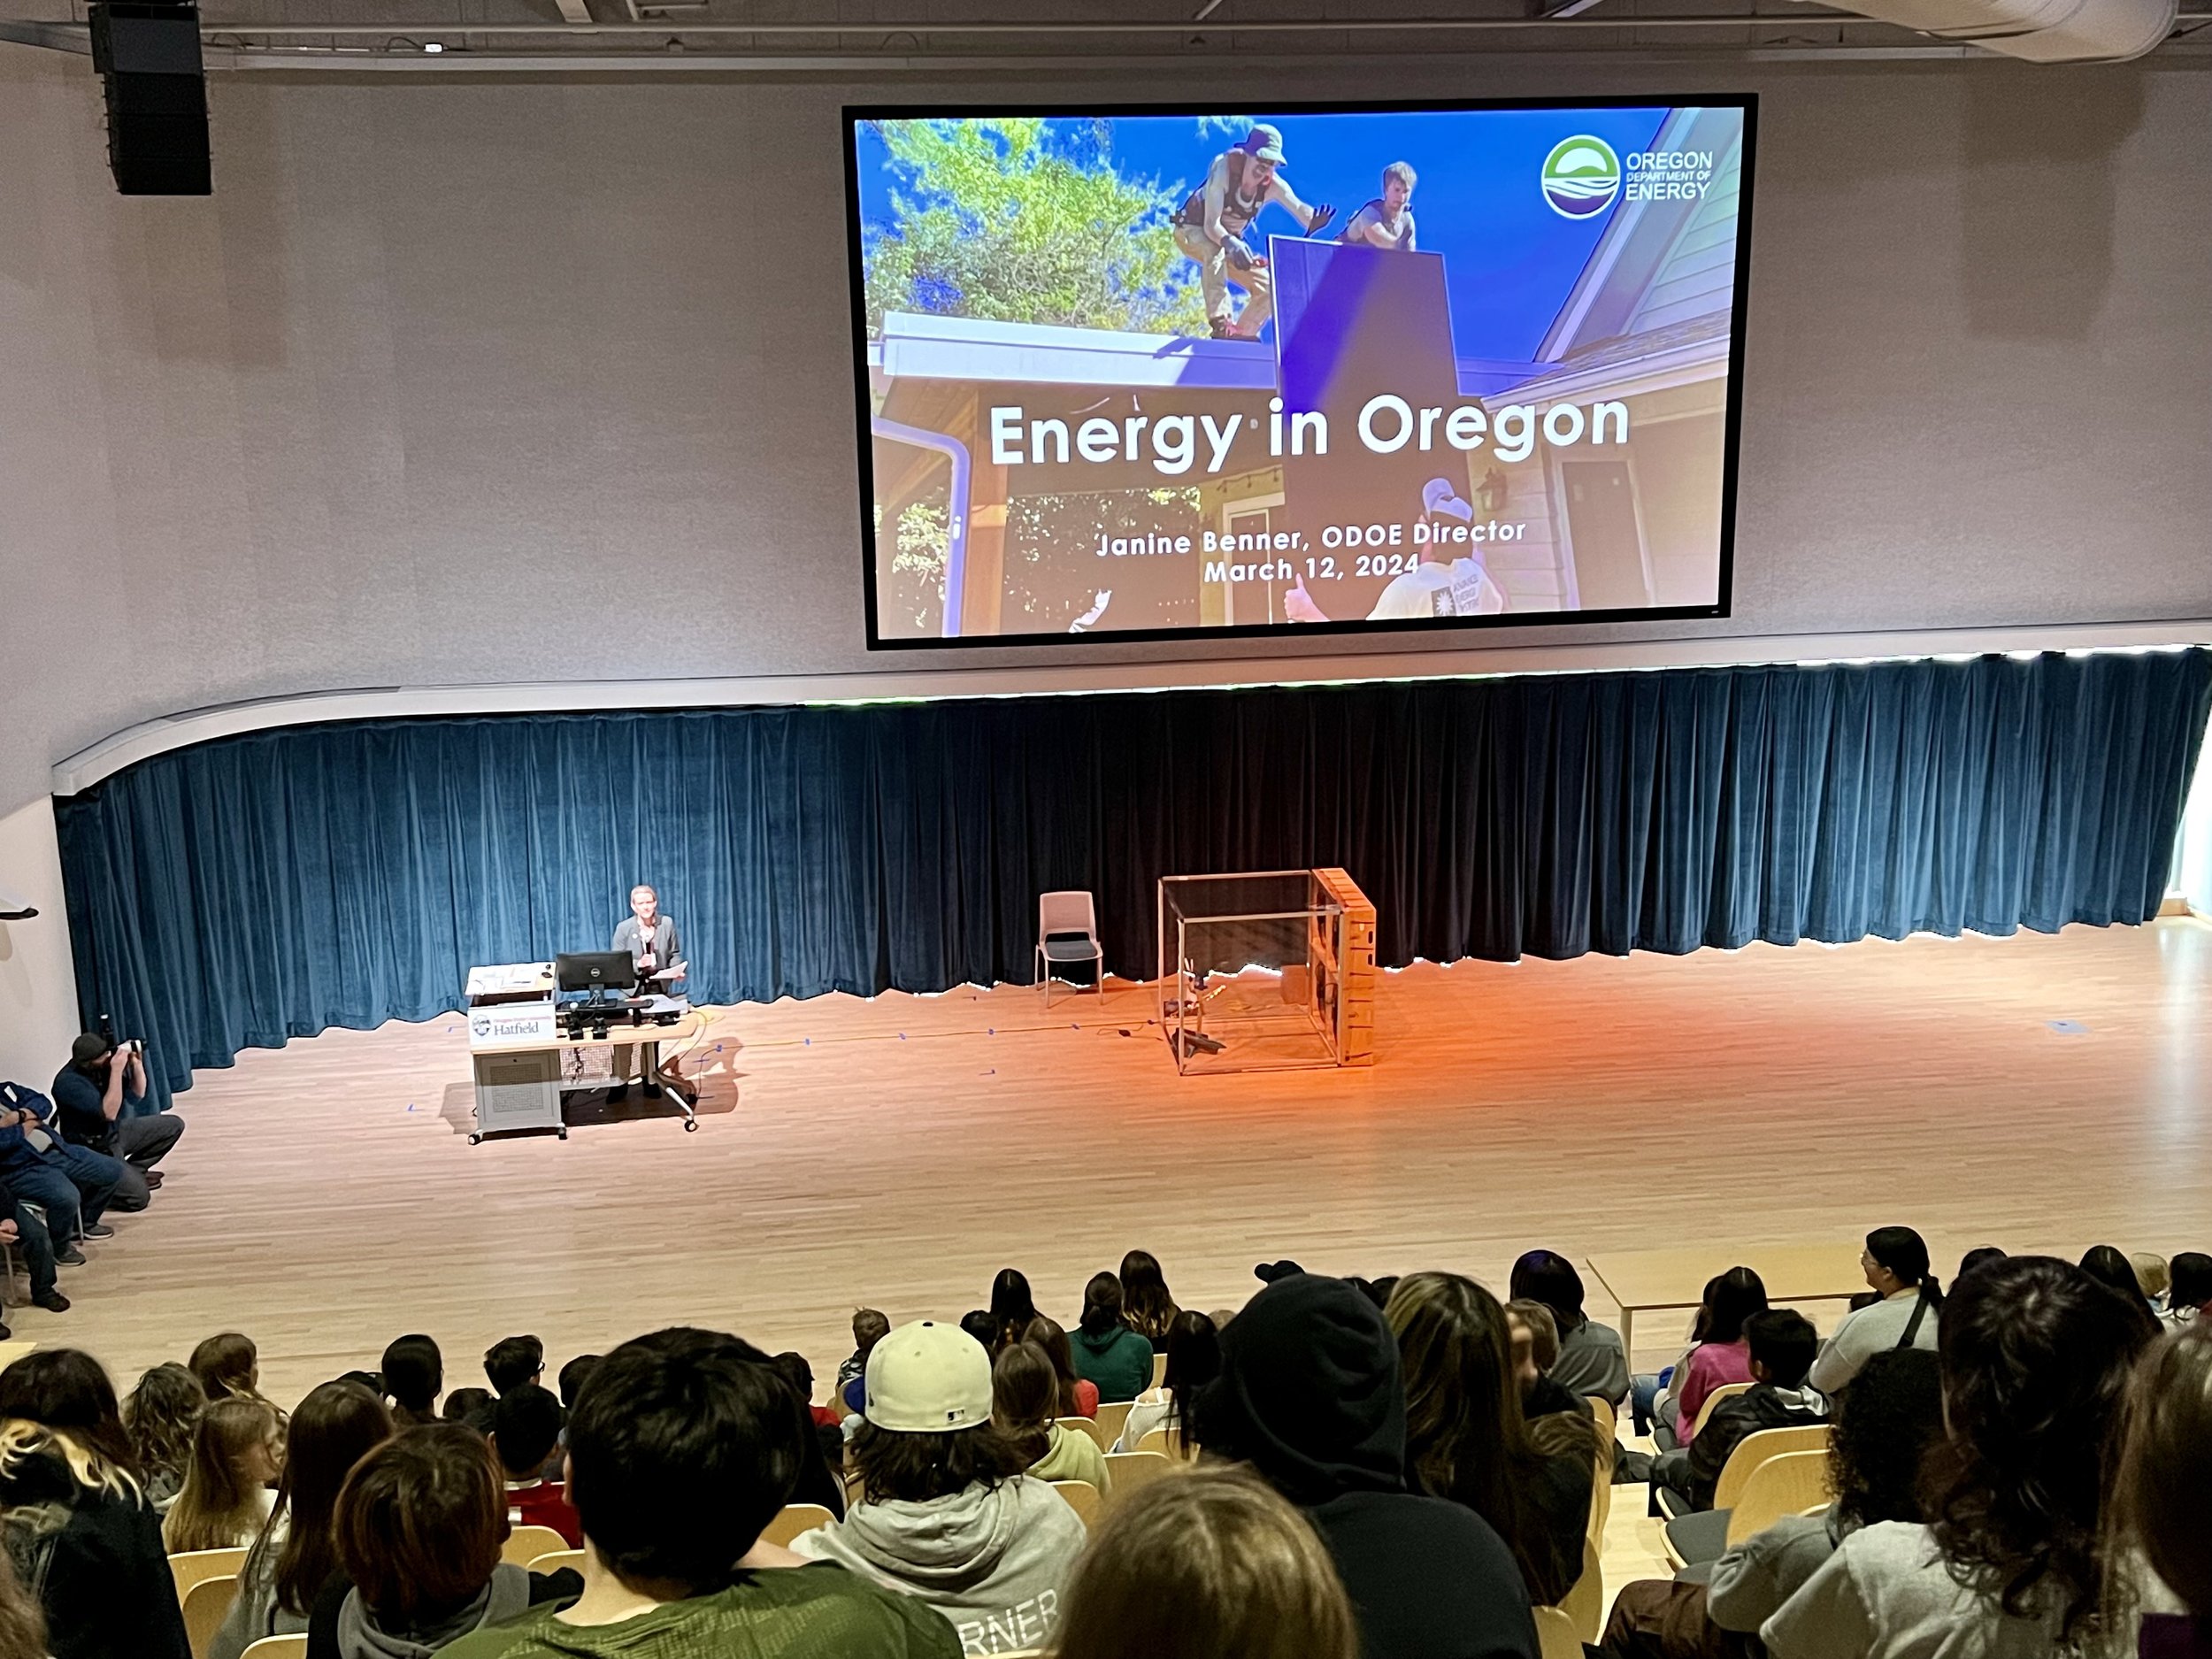 Janine kicked off the morning with a presentation on energy in Oregon.